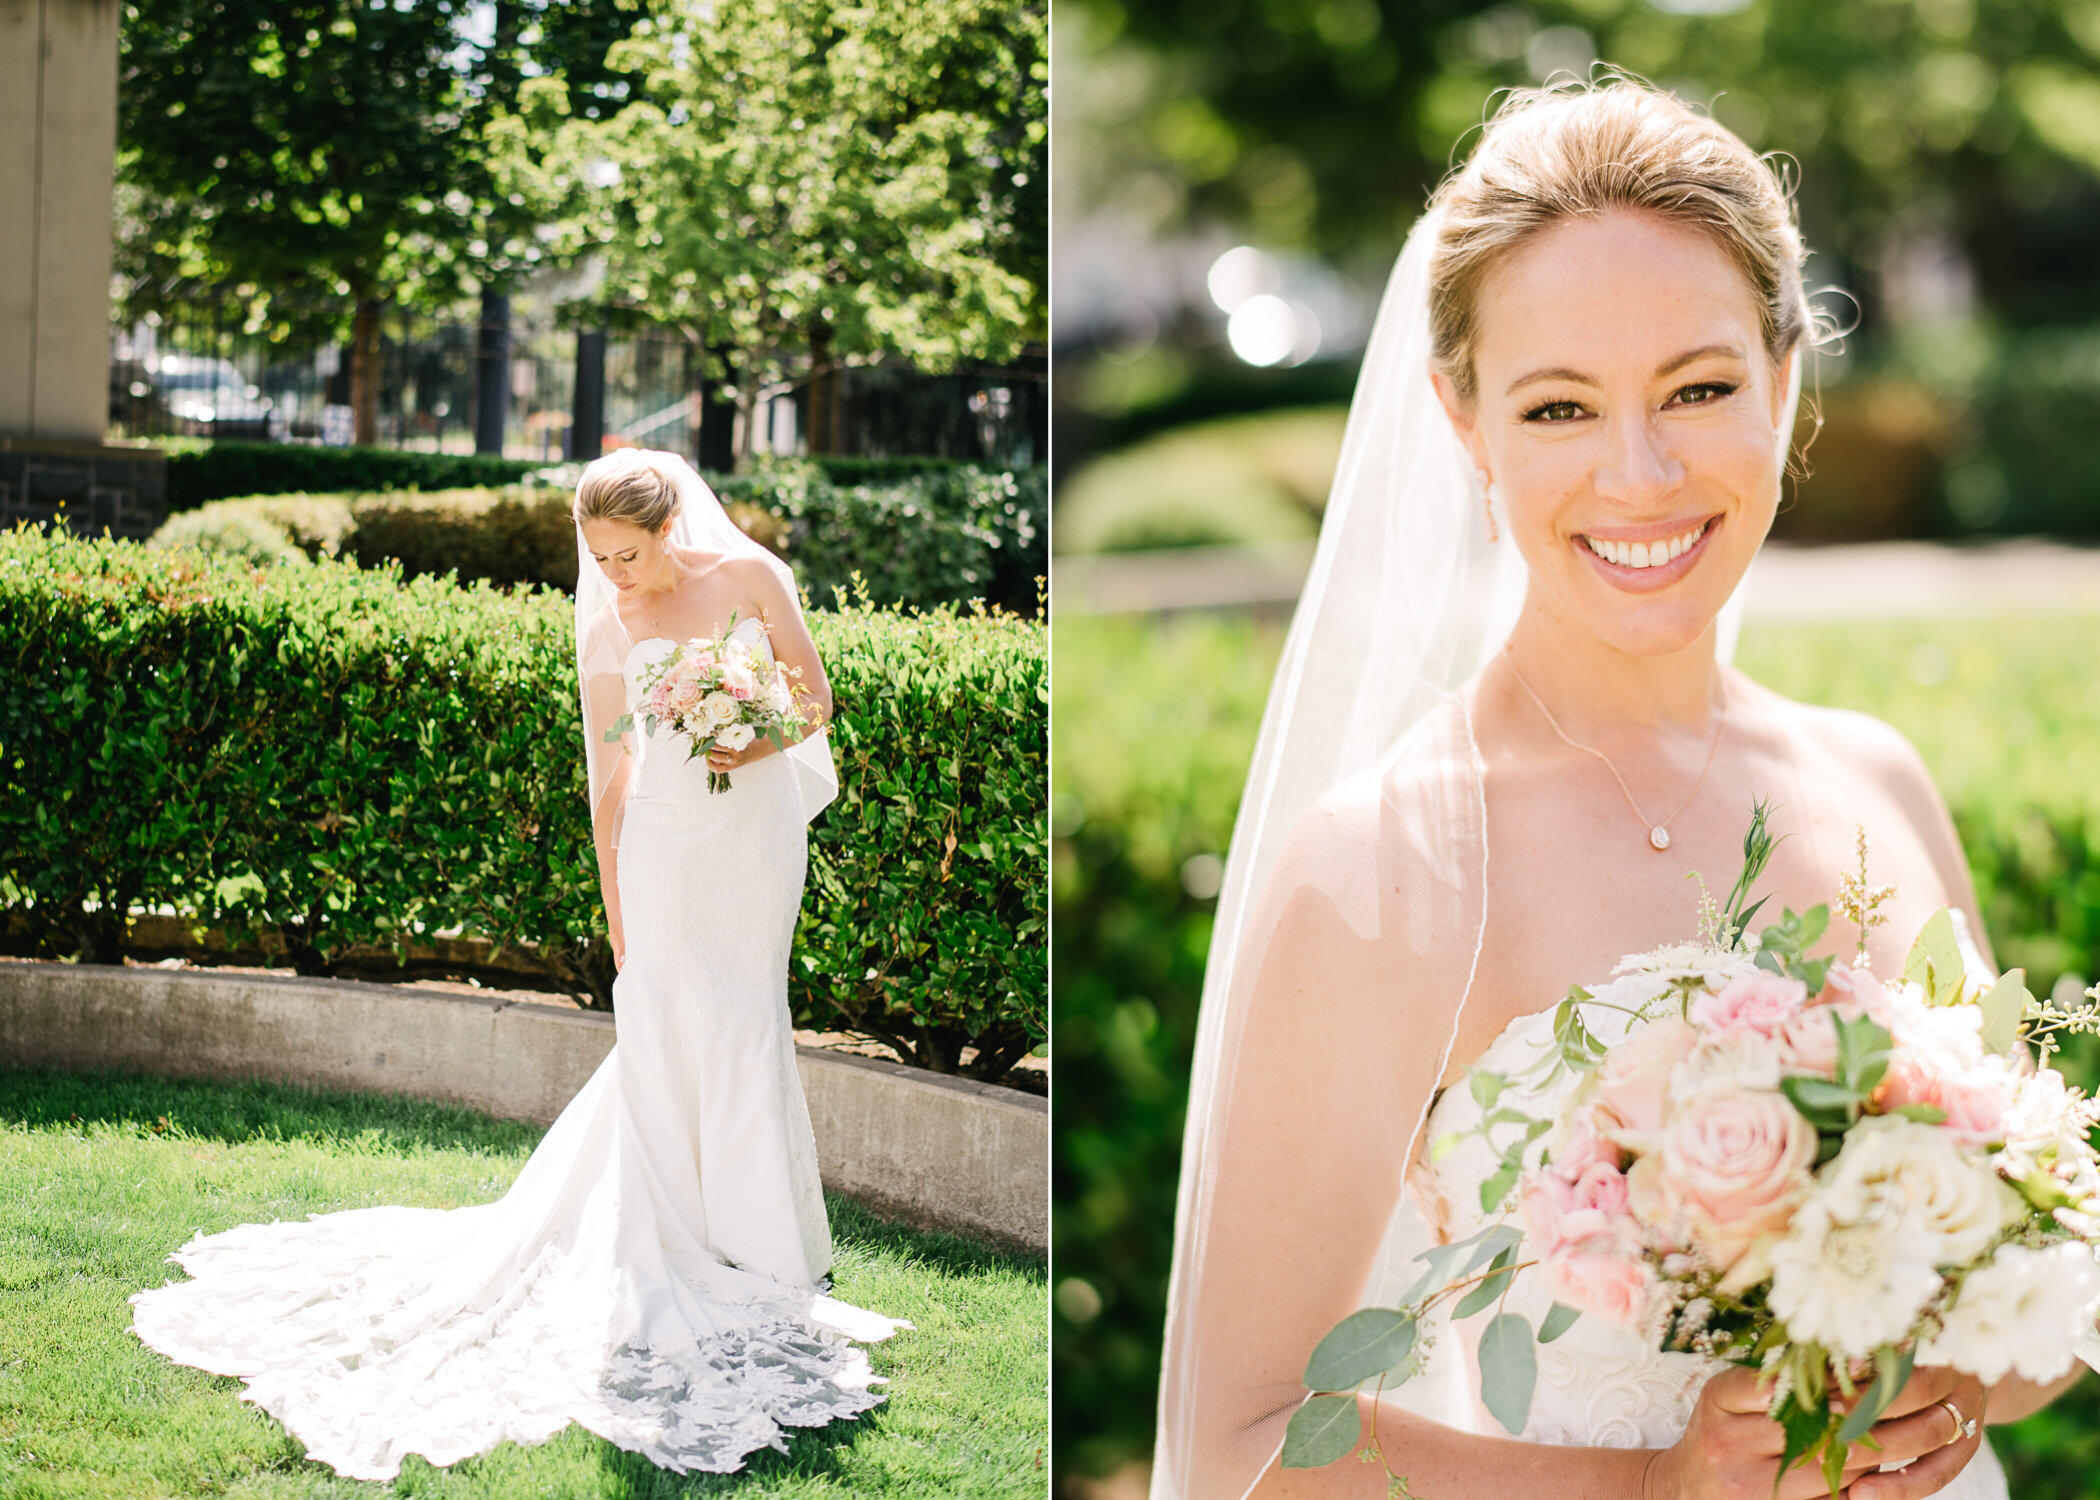  Bride adjusts her dress in backlit sunshine in church courtyard with green grass 